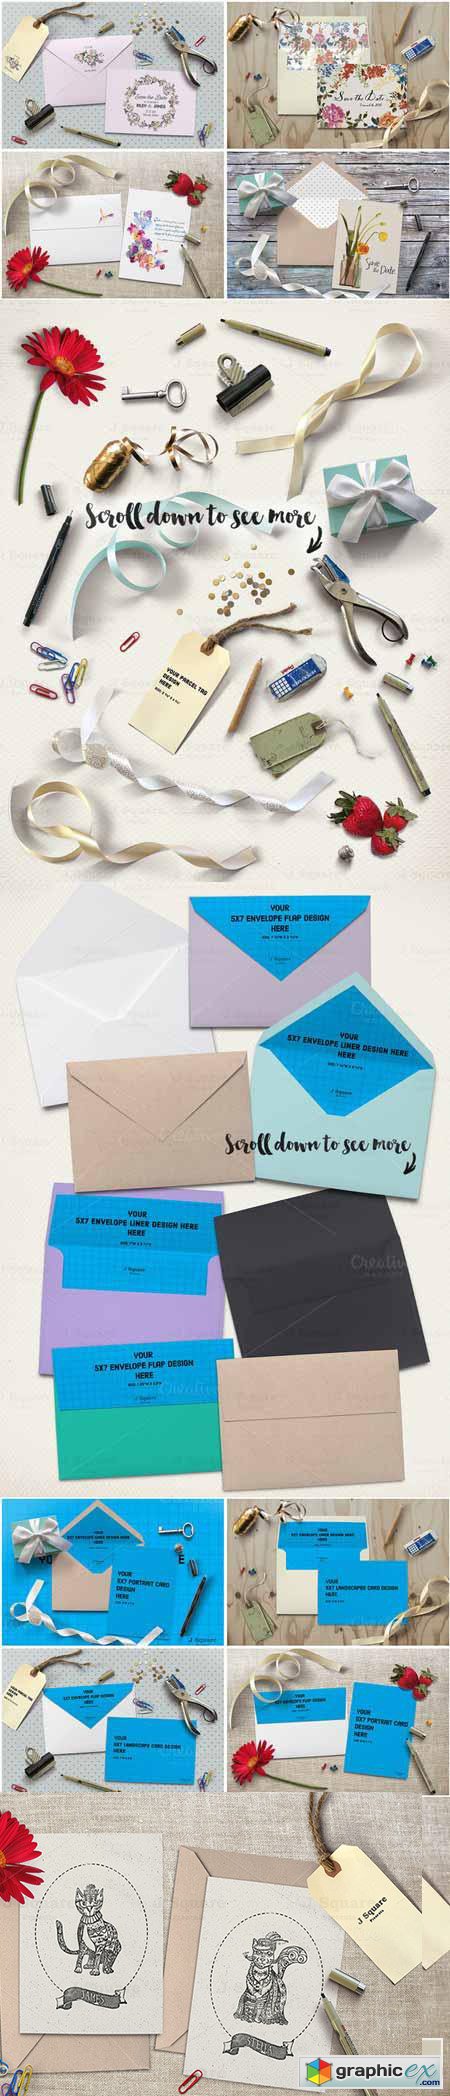  5x7 Card/Envelope/Objects Mock Up 2